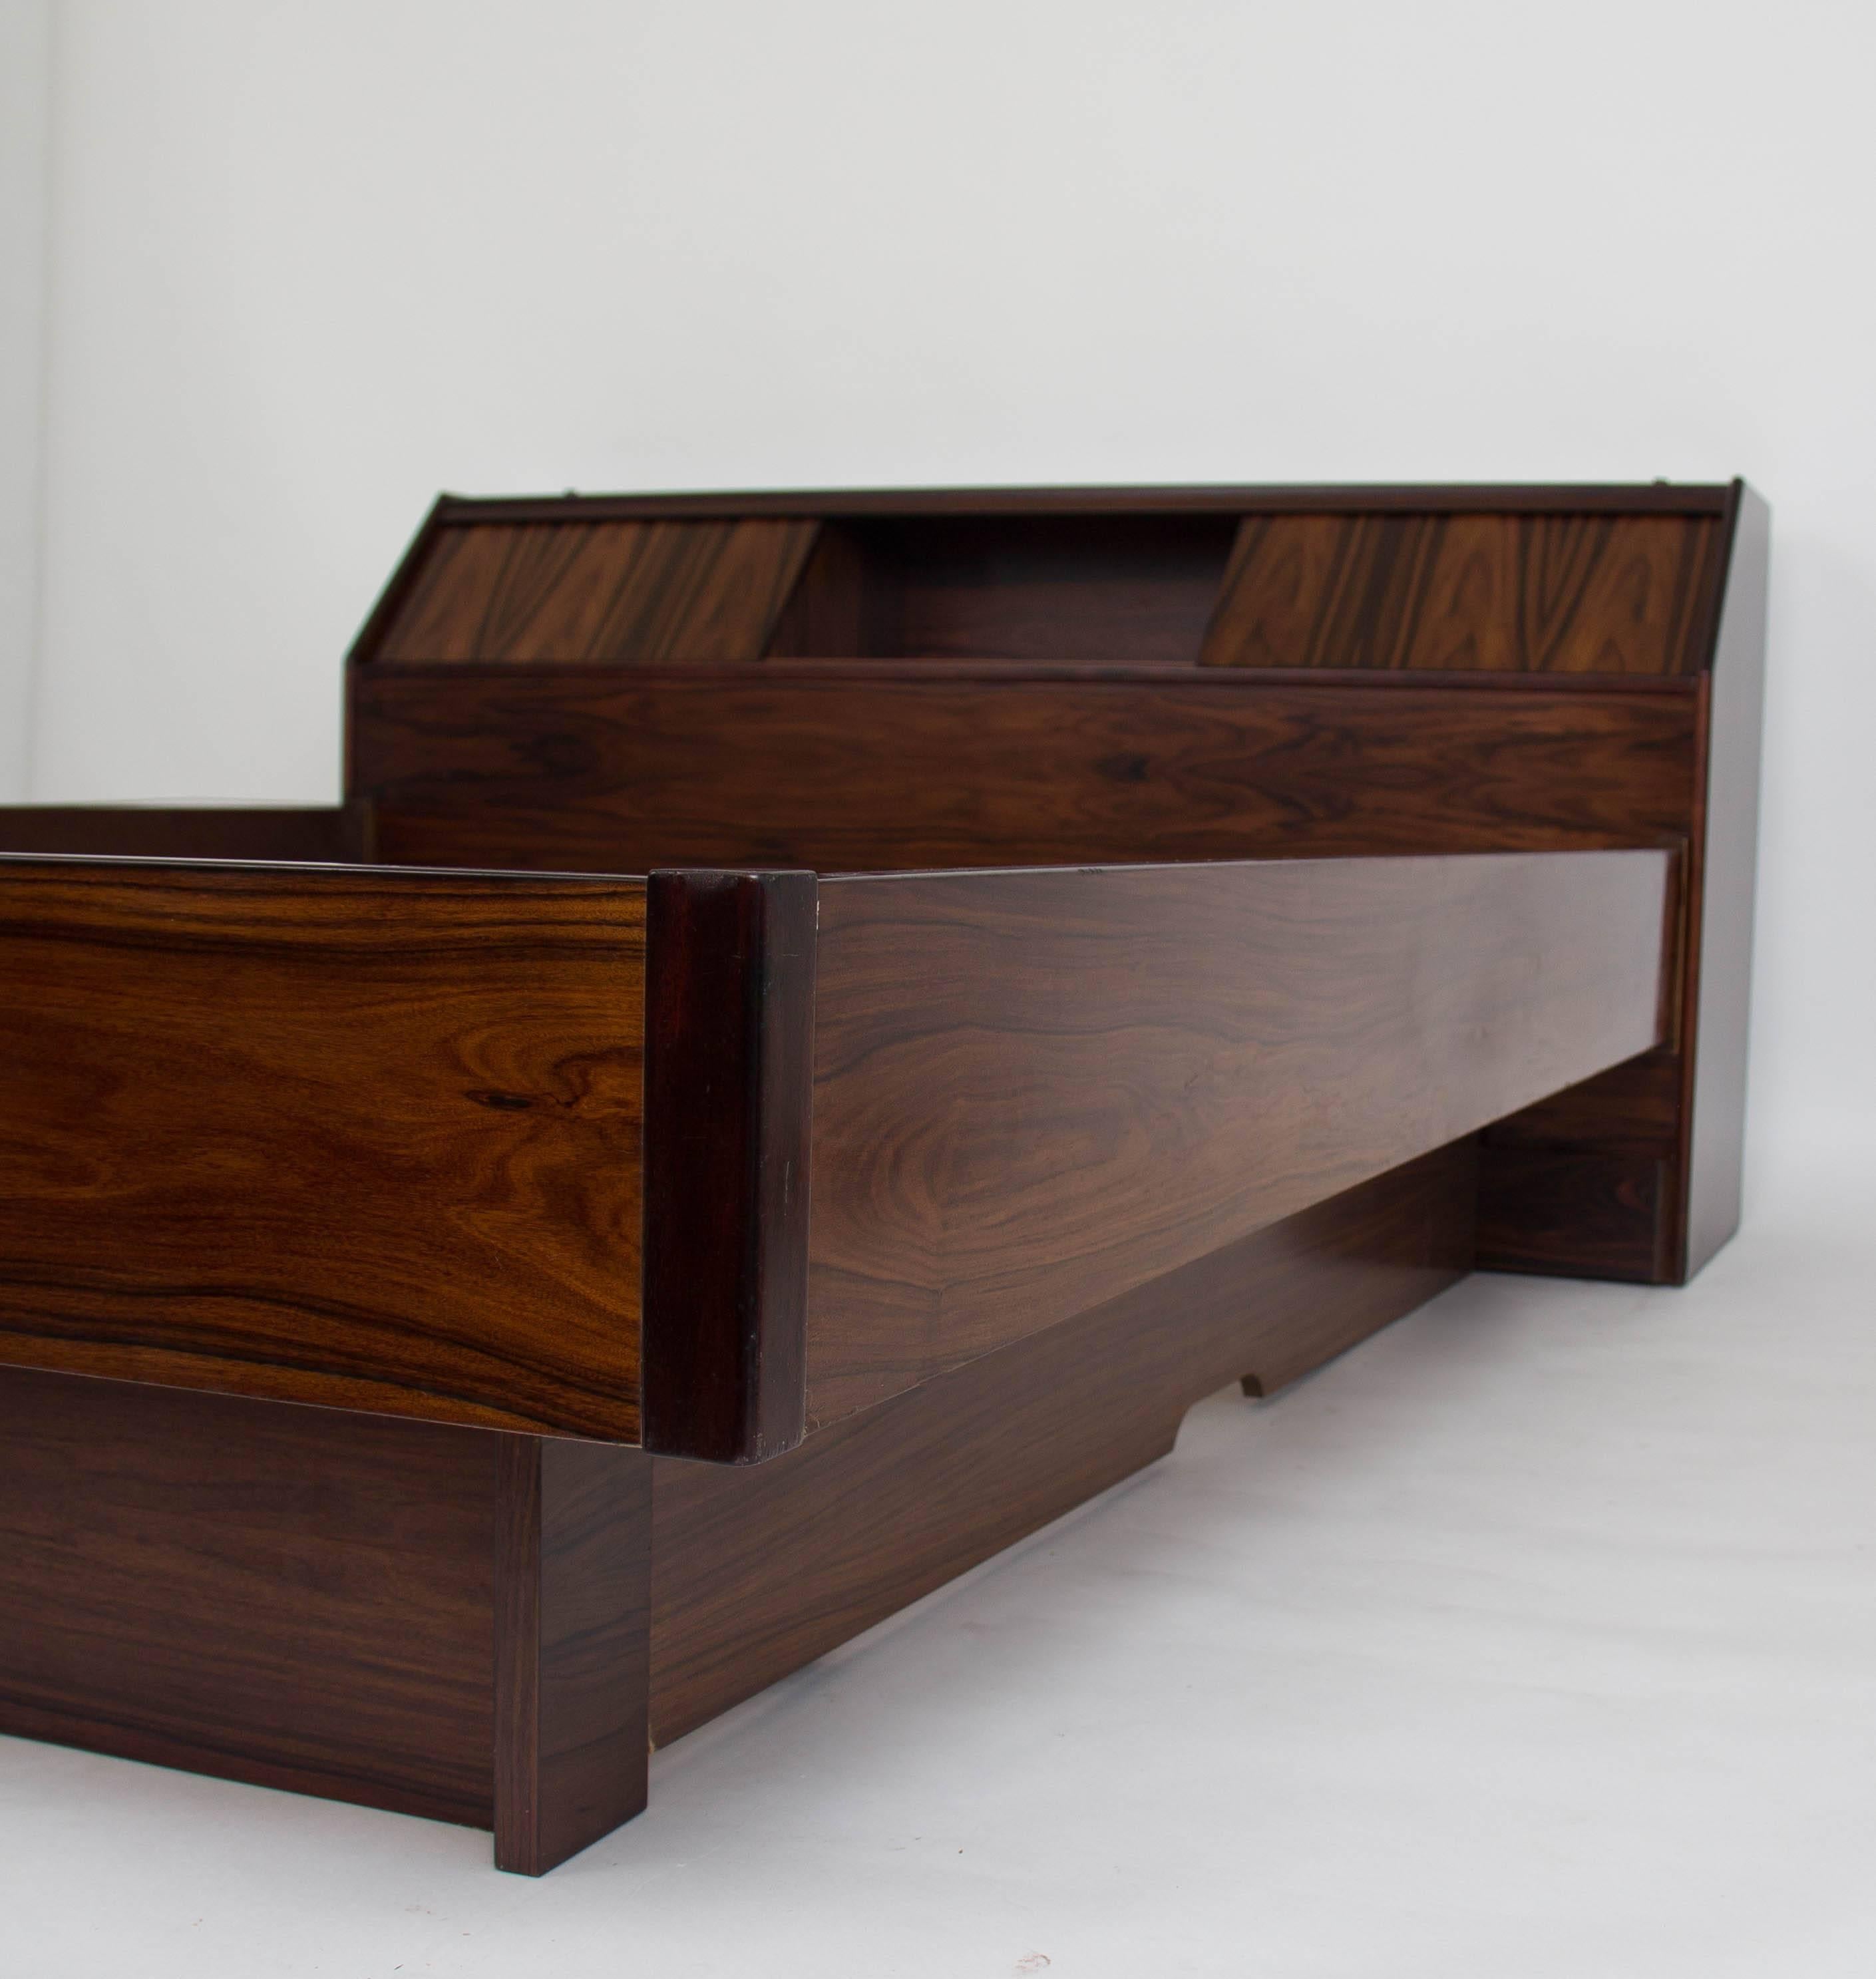 A queen-sized bed frame and headboard in highly figured rosewood, distributed and exported from Norway by Westnofa. The angled headboard has two sliding doors that open onto a storage compartment. The platform seems to float, with recessed siding in